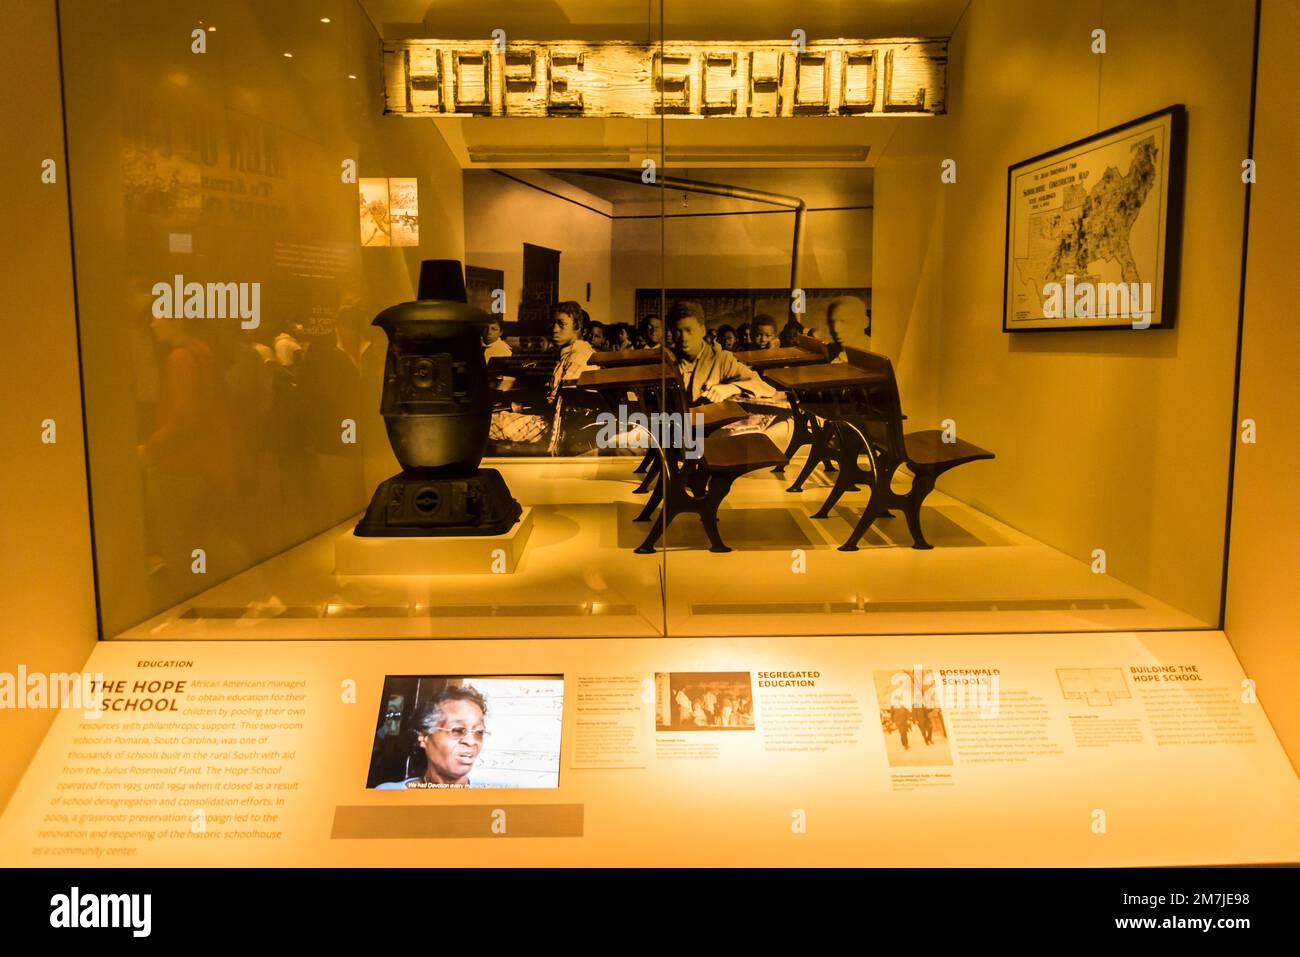 The Hope school, National Museum of African American History and Culture,, Washington, D.C., USA Stock Photo